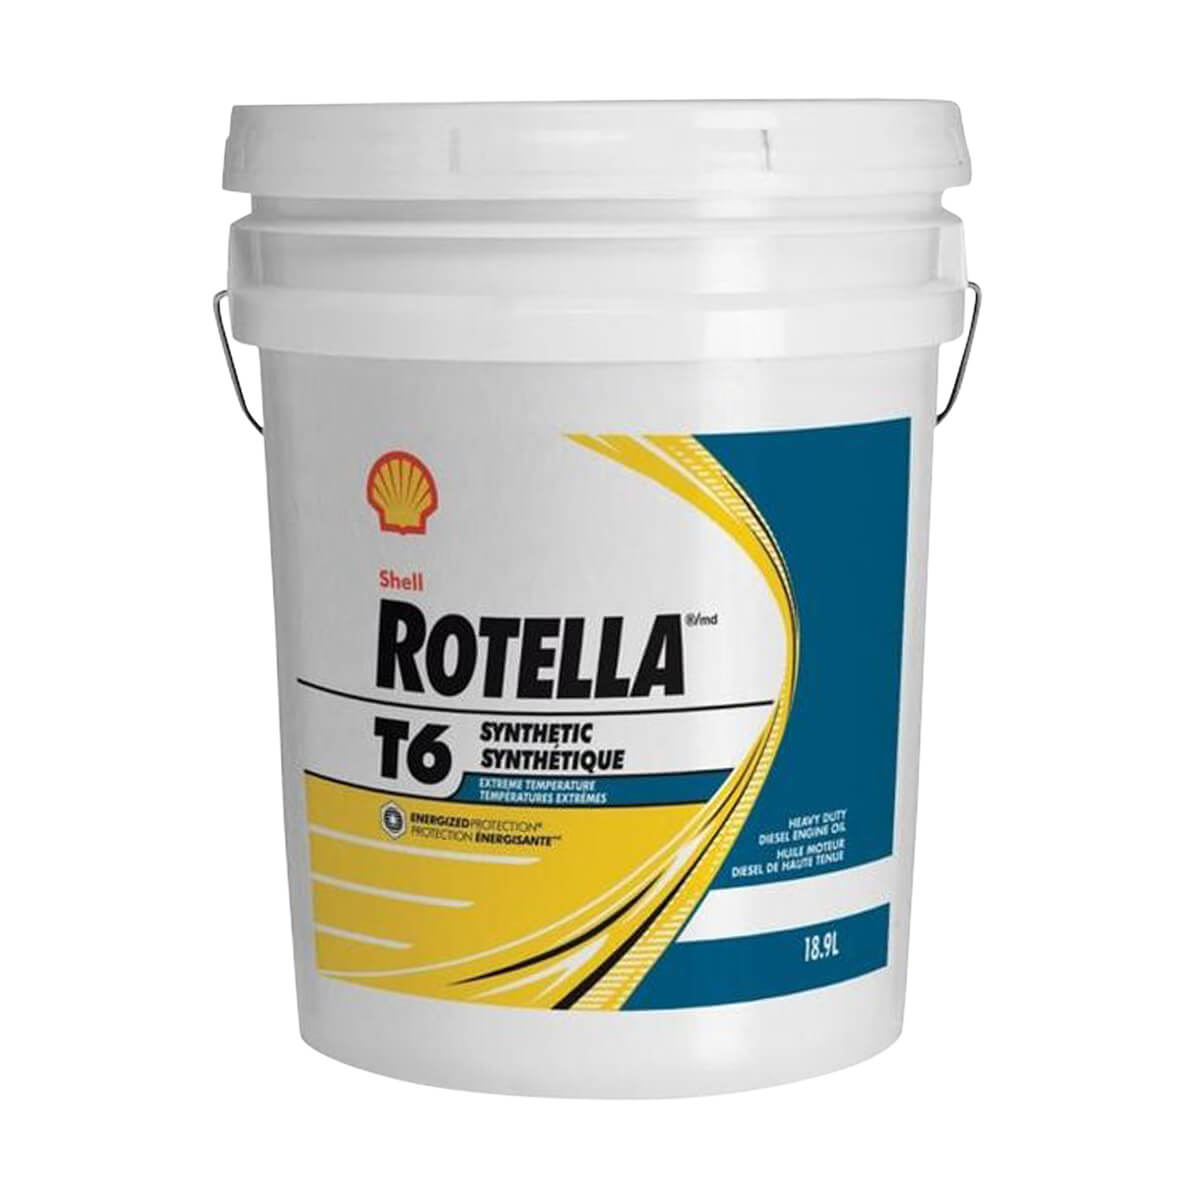 shell-rotella-t6-triple-protection-synthetic-0w-40-18-9l-ufa